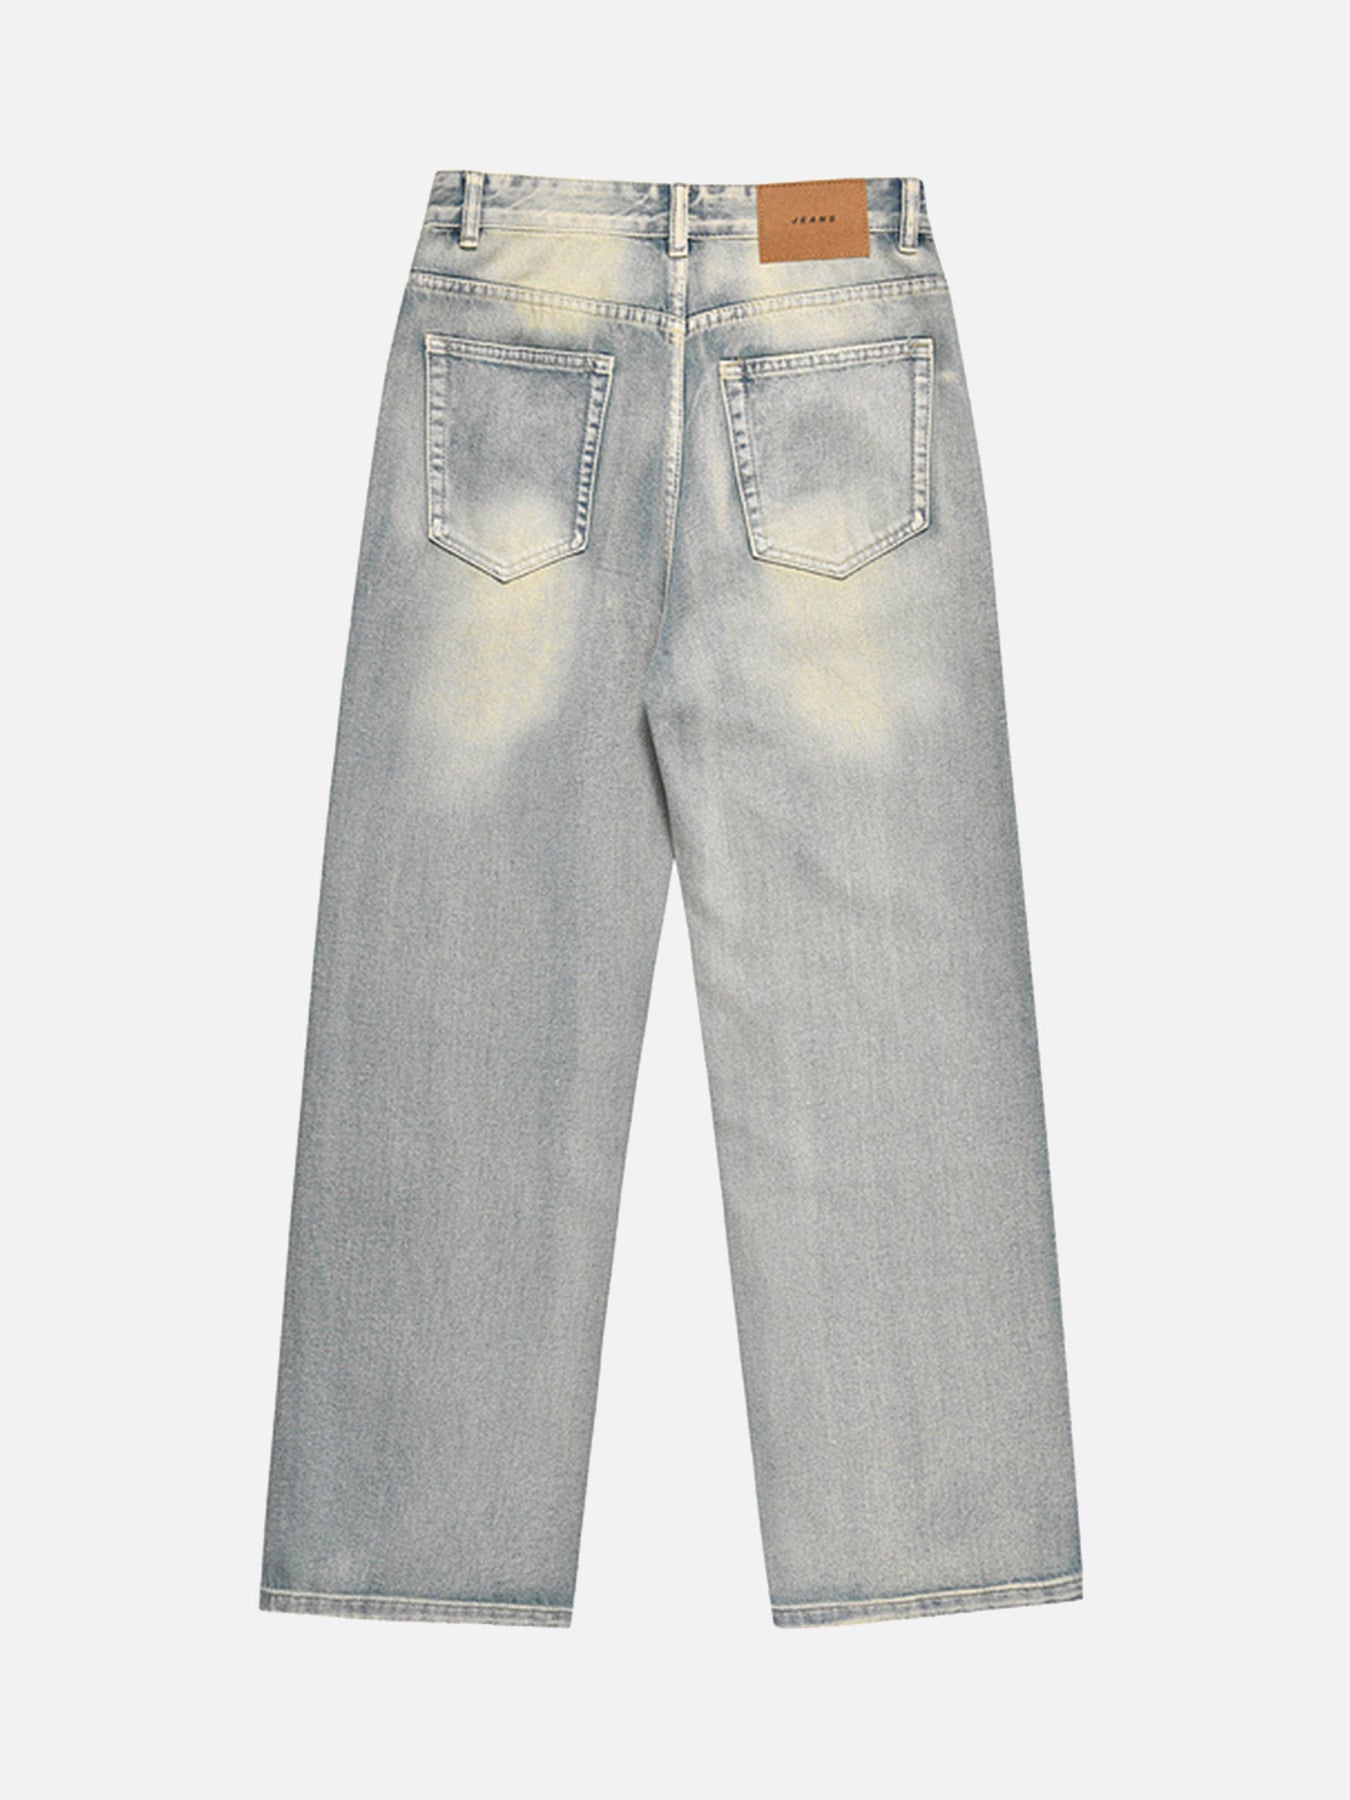 The Supermade Washed And Worn Loose Jeans